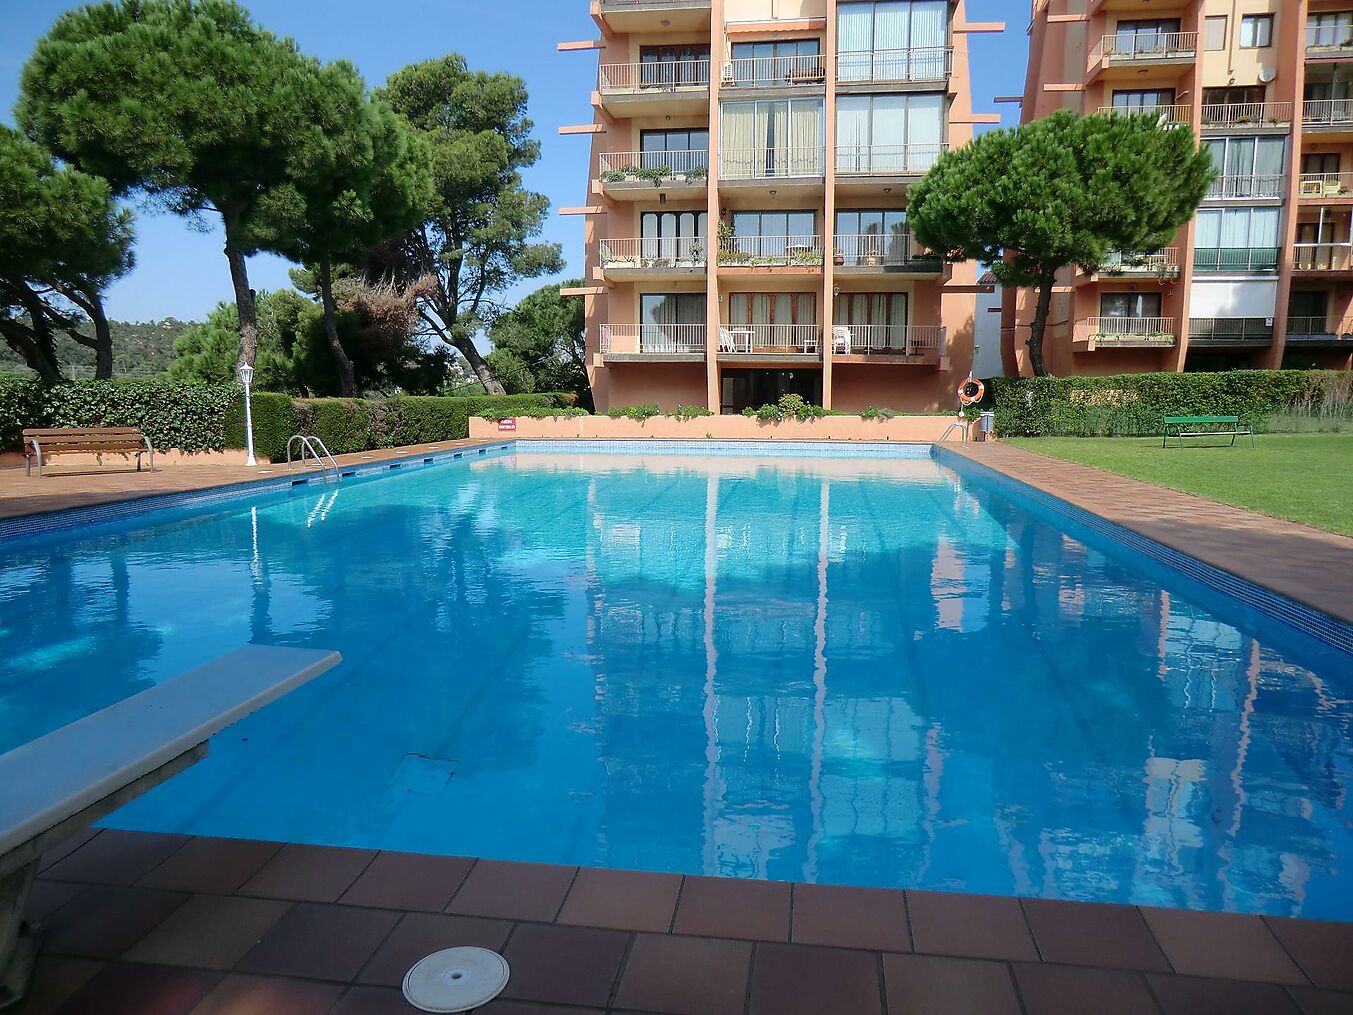 Modern refurbished apartment located in quiet residential area of Playa de Aro.